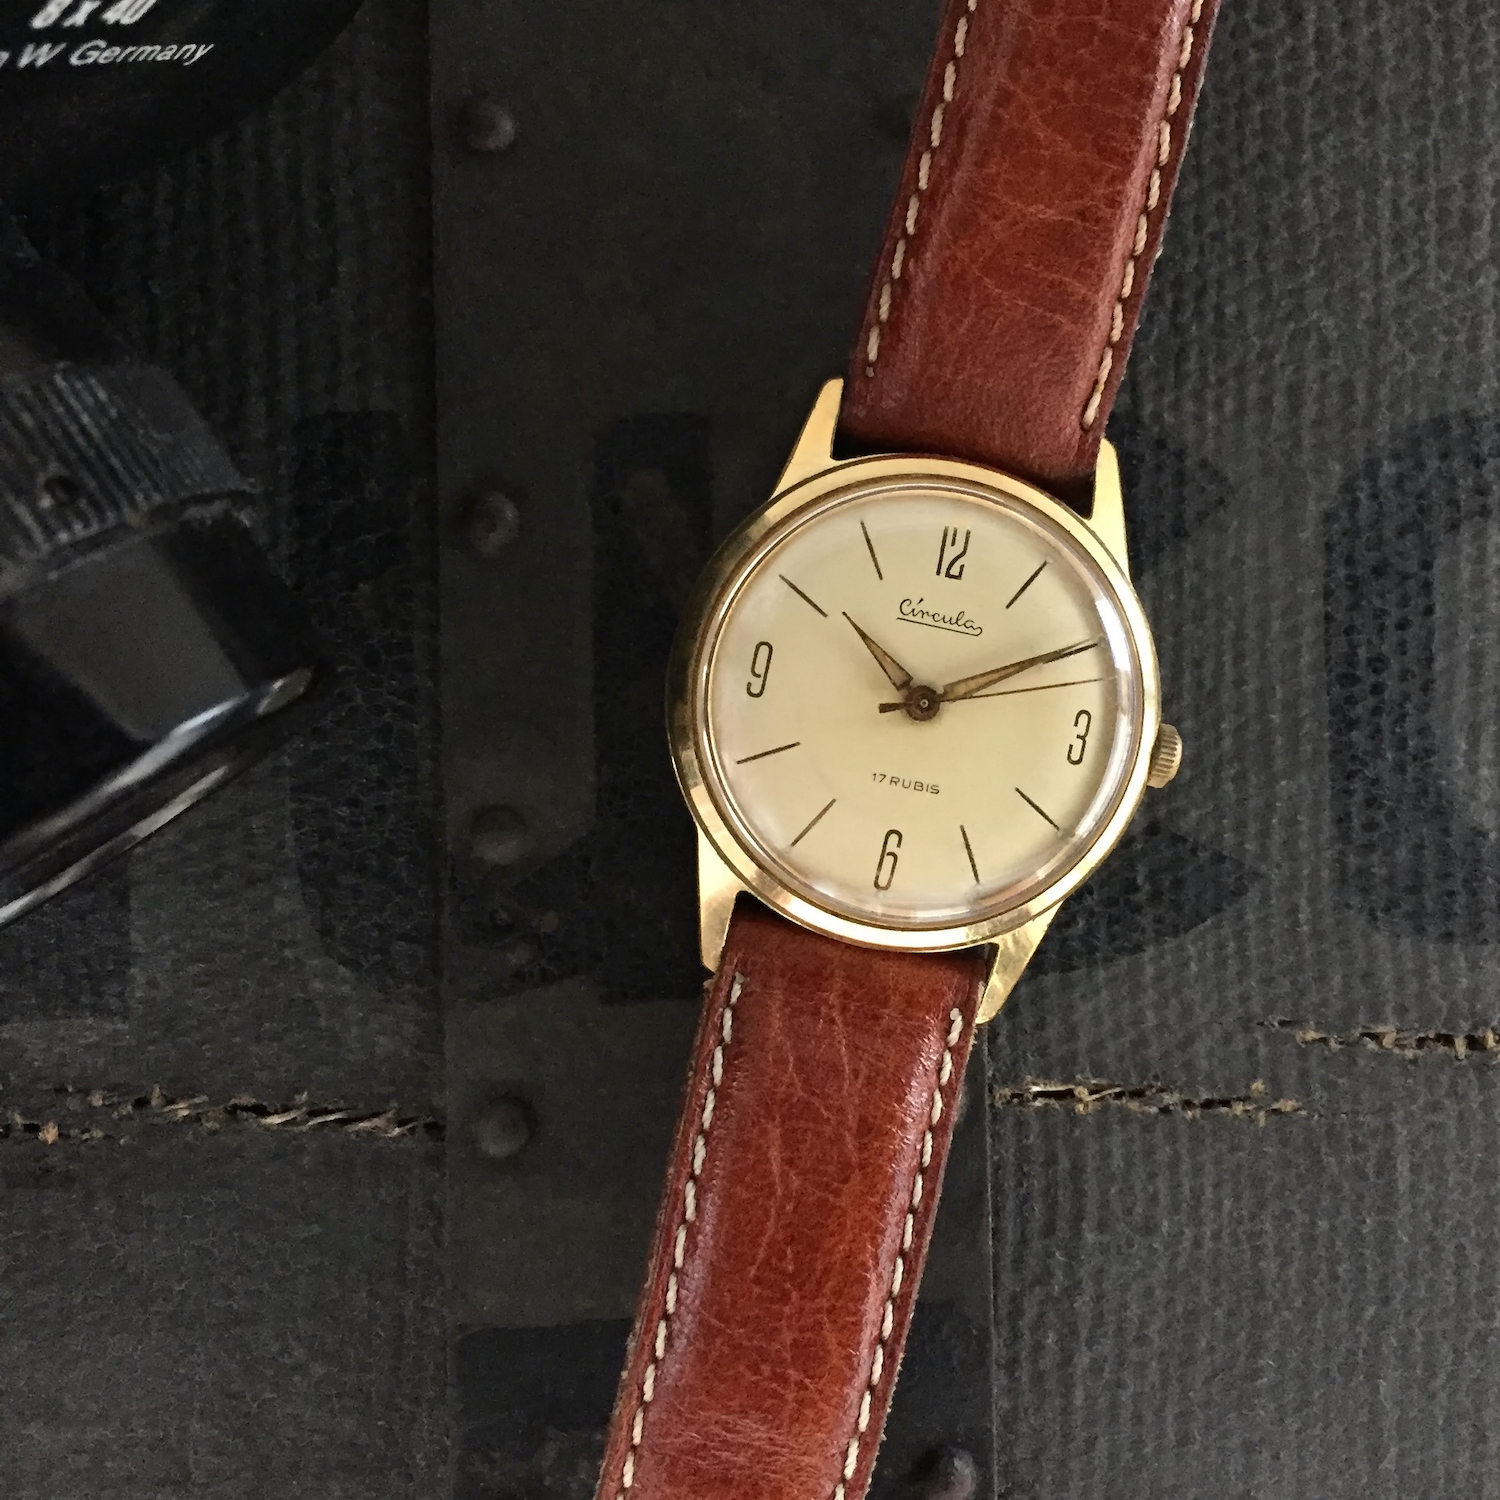 A dress watch from the 1950s, made by Circula.